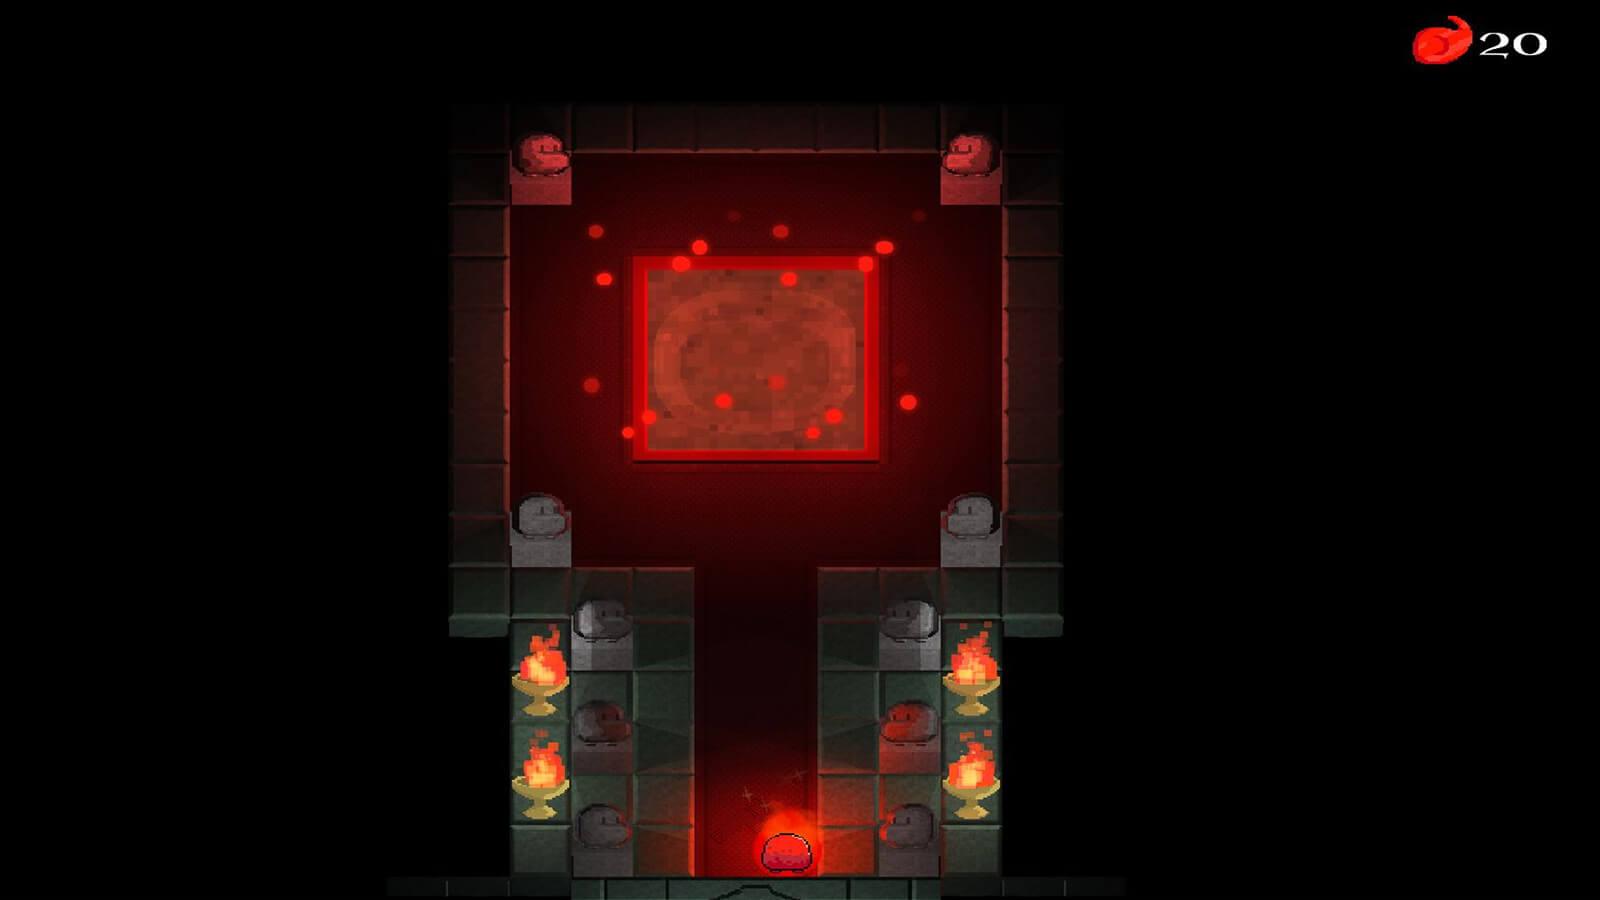 A red gooey enters a chamber with a glowing red square platform in the center. 